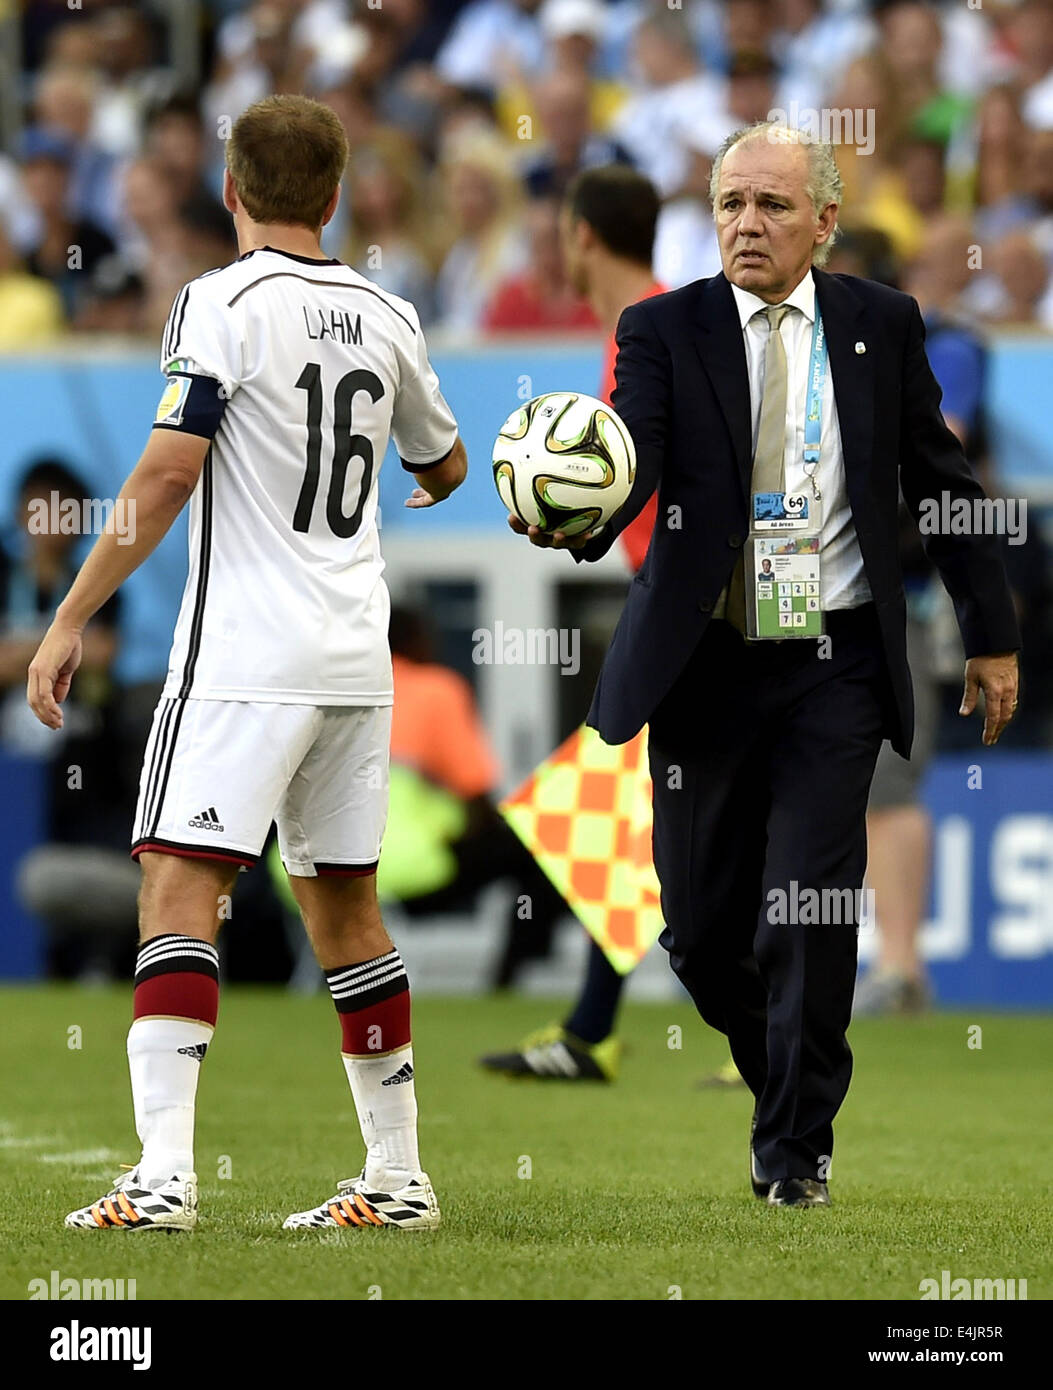 Rio De Janeiro, Brazil. 13th July, 2014. Argentina's coach Alejandro Sabella (R) gives the ball to Germany's Philipp Lahm during the final match between Germany and Argentina of 2014 FIFA World Cup at the Estadio do Maracana Stadium in Rio de Janeiro, Brazil, on July 13, 2014. Credit:  Qi Heng/Xinhua/Alamy Live News Stock Photo